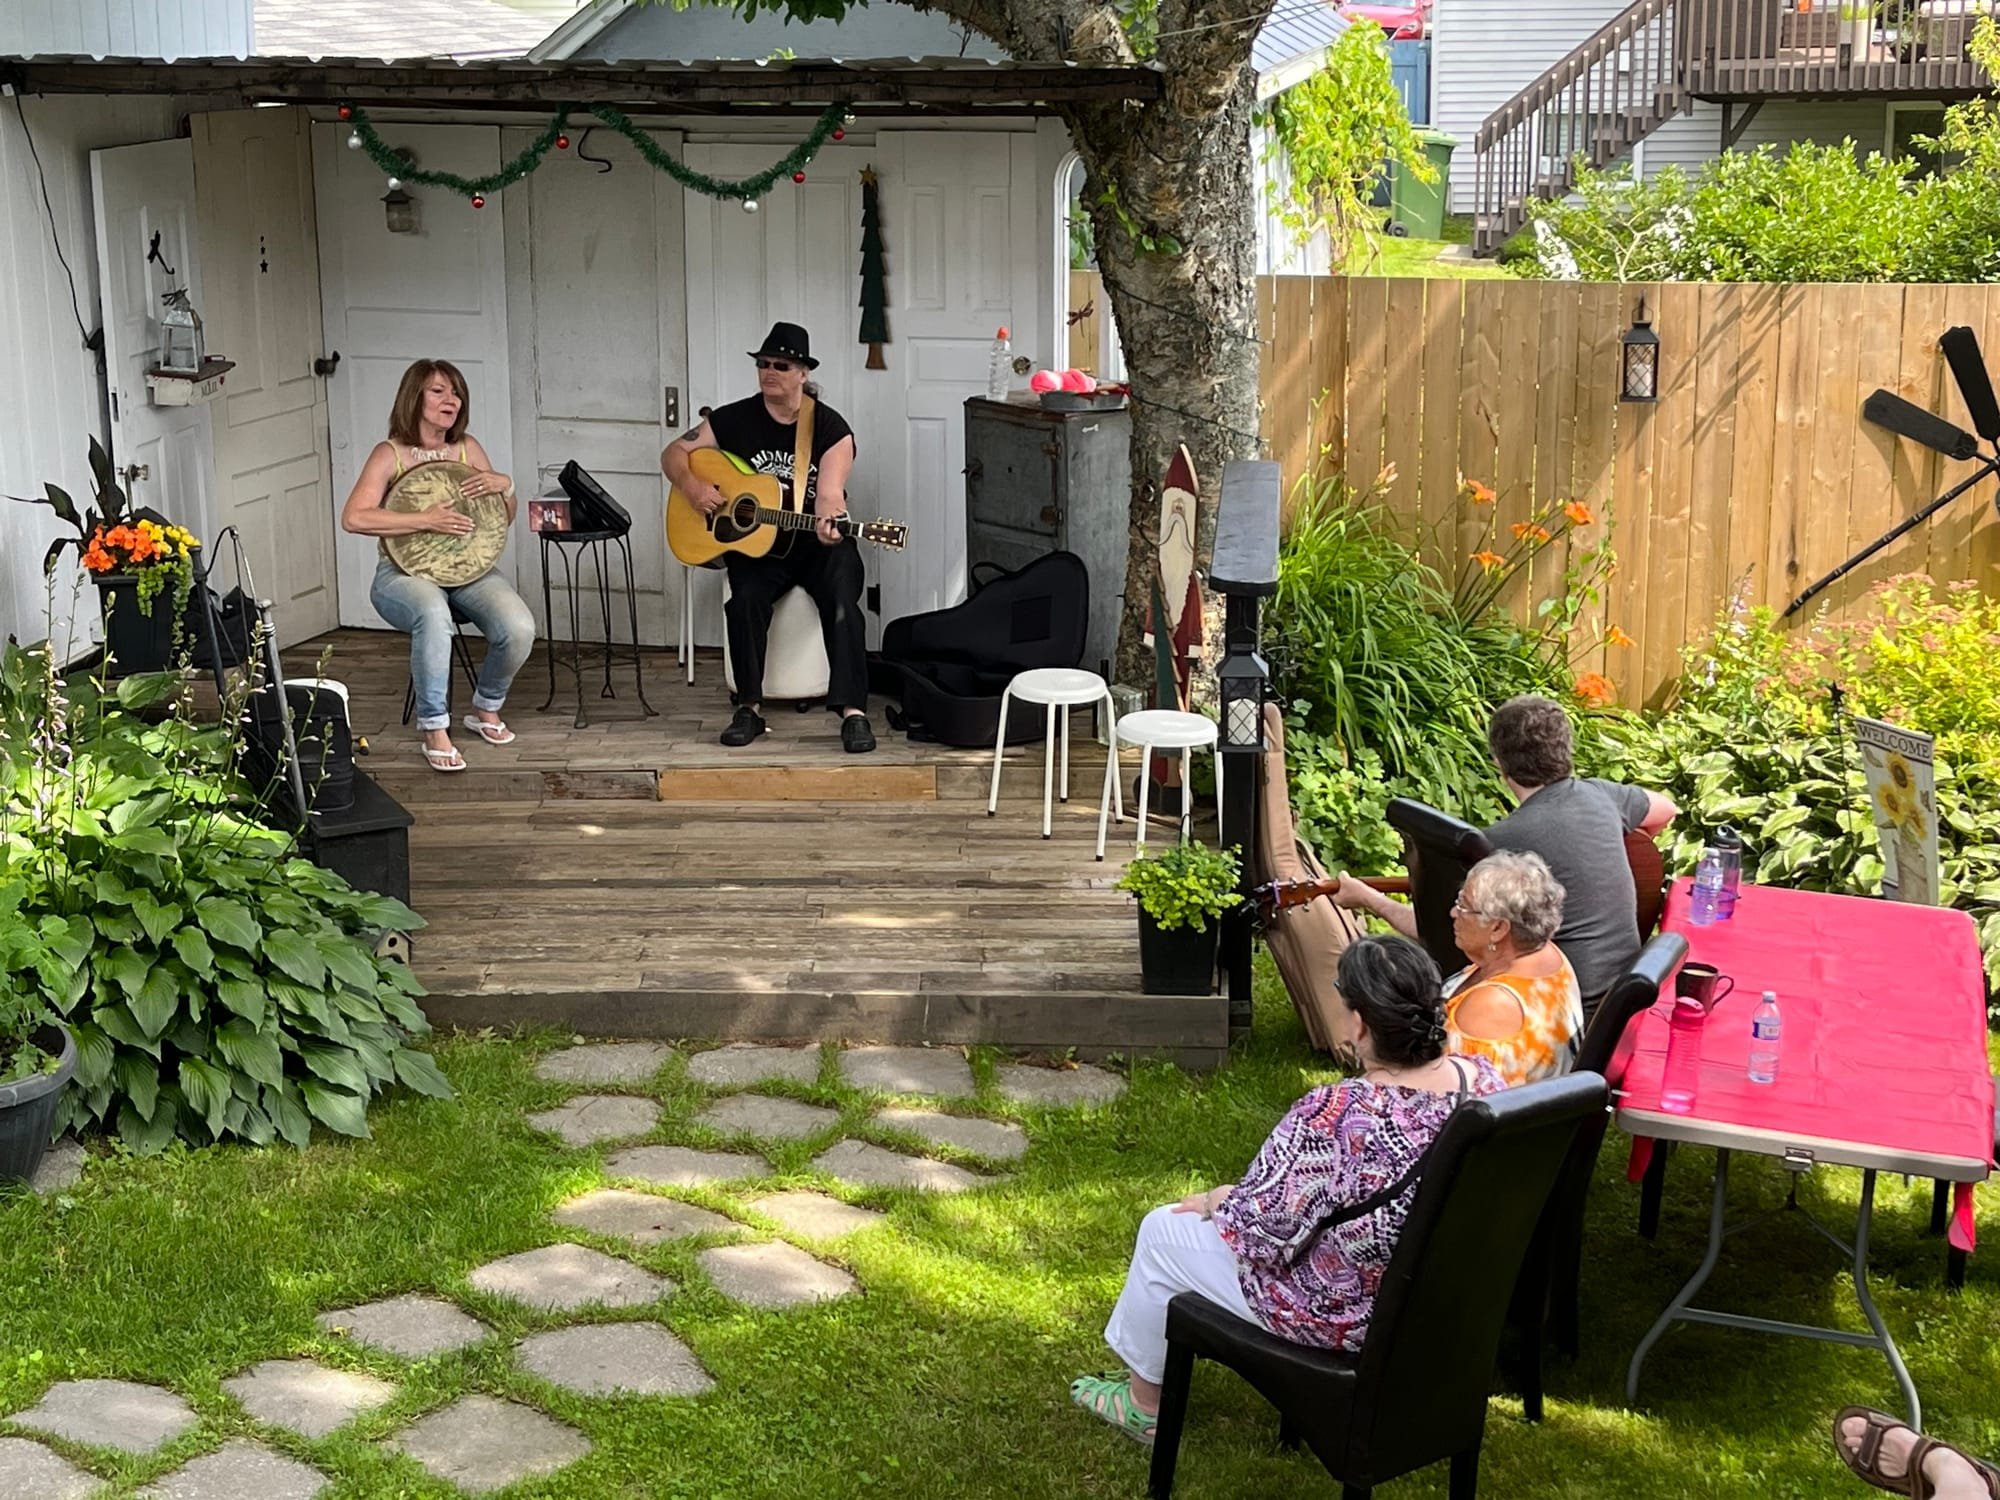 Family Musicians for the BBQ